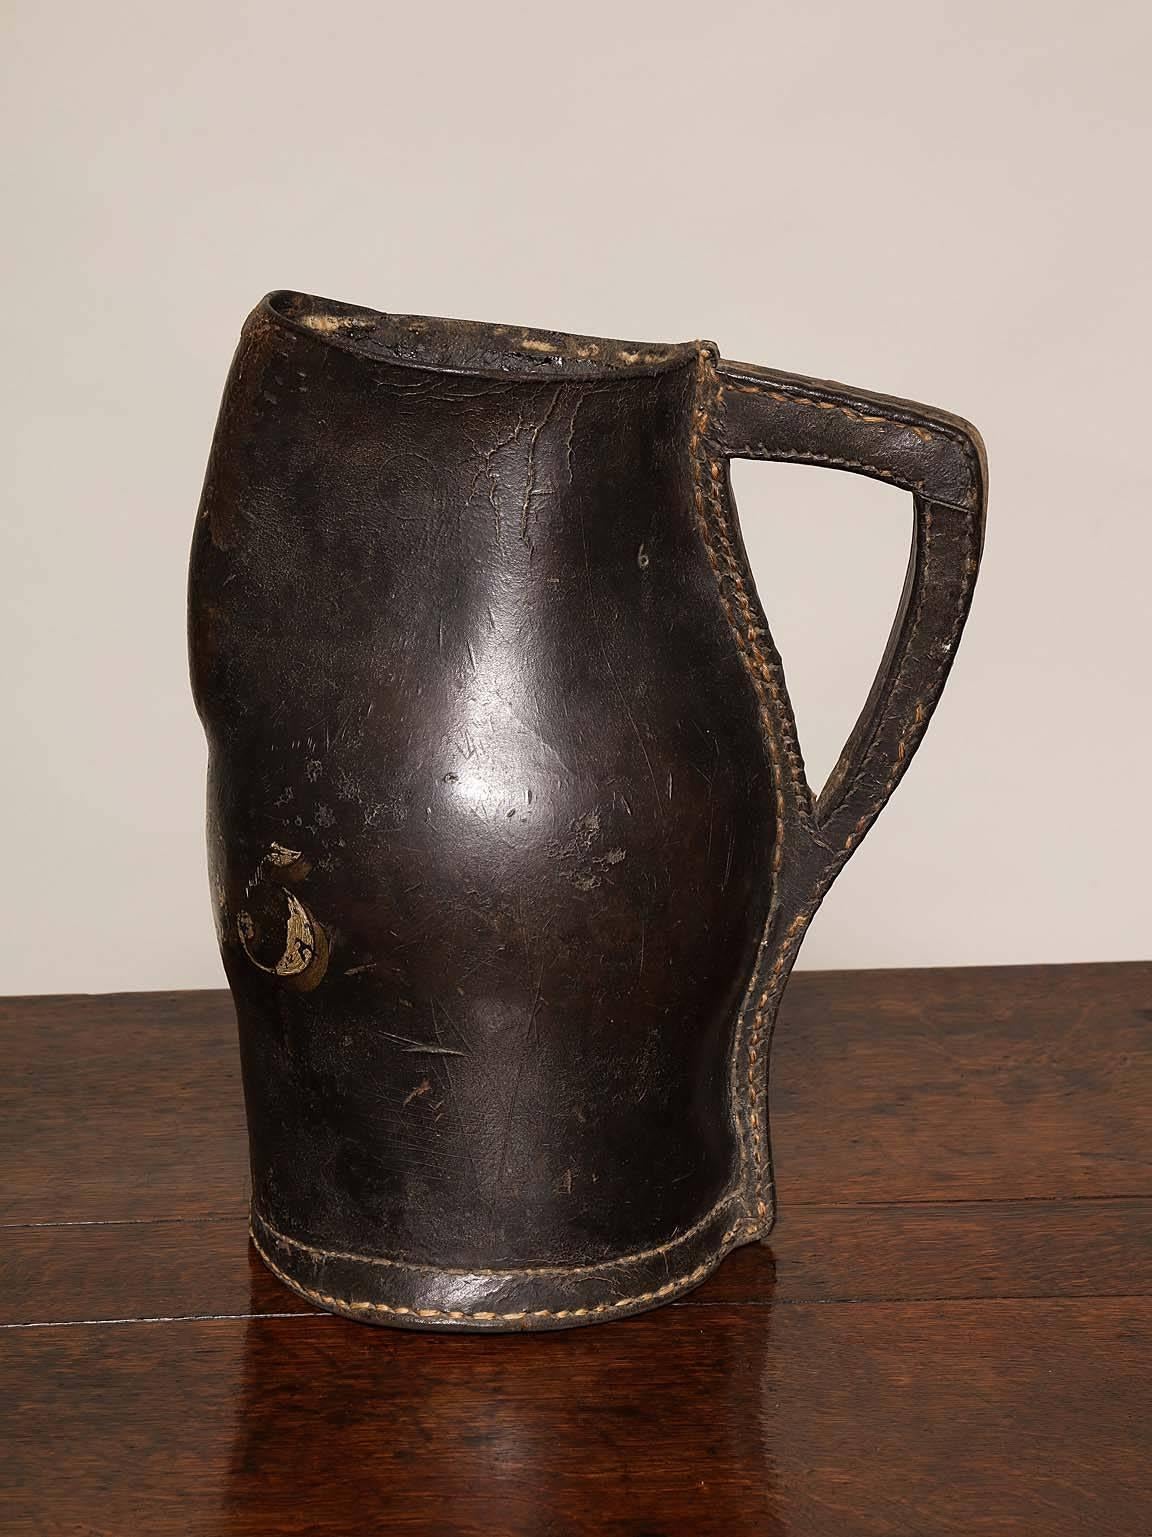 Very nice 18th century leather pitcher or 